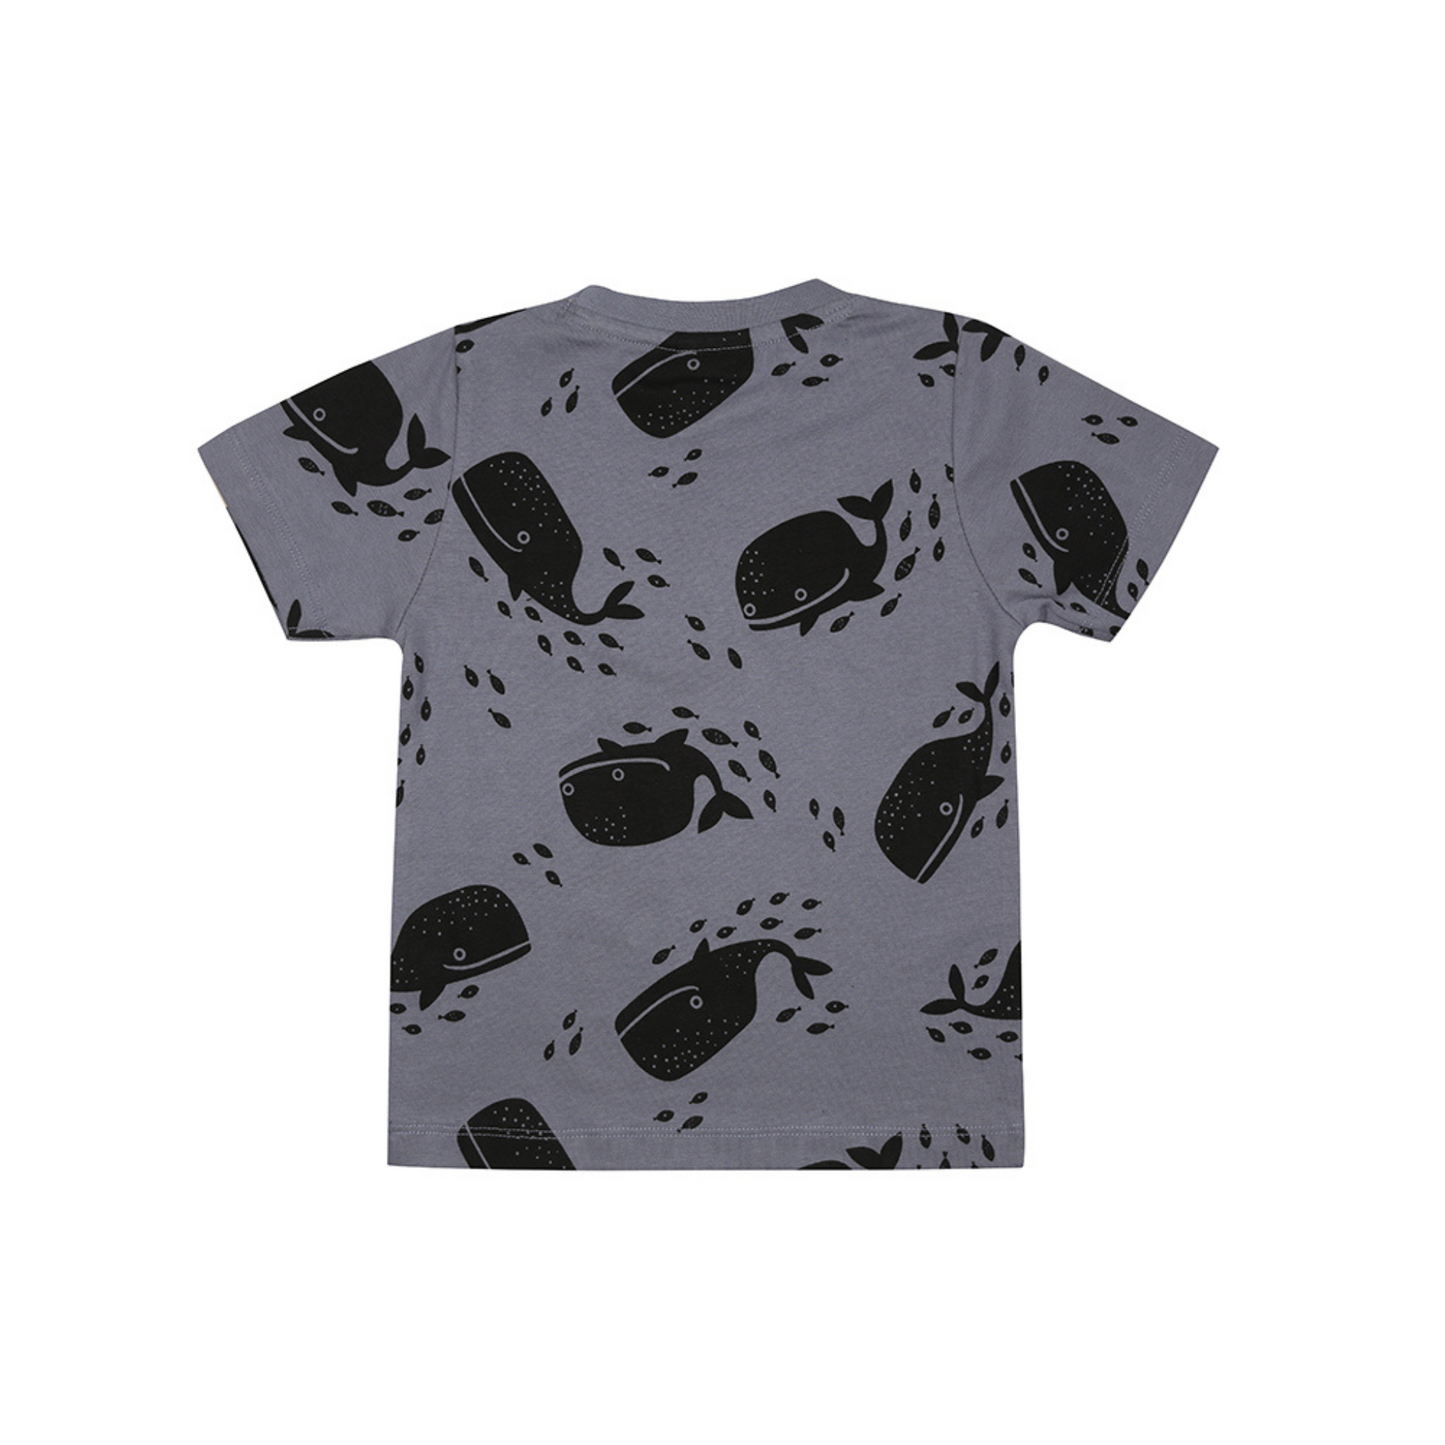 Whales t-shirt back